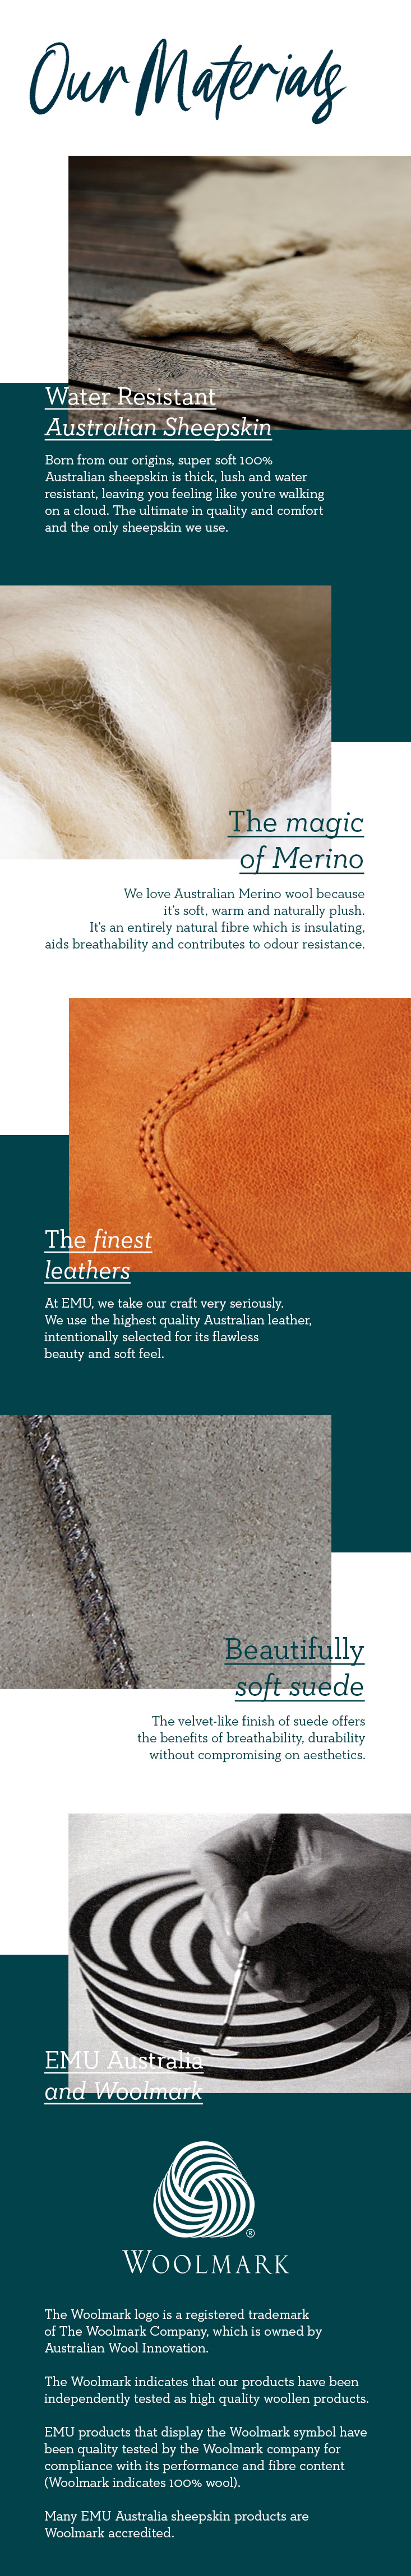 Landing page titled 'Our Materials' detailing the superior quality, benefits and features of the natural materials we use for our products including water-resistant Australian sheepskin, Australian Merino wool, the highest quality Australian leathers and suede. We are also proudly Woolmark Accredited meaning our products are compliant with The Woolmark Company's highest standards of performance and fibre content (Woolmark indicates 100% wool).